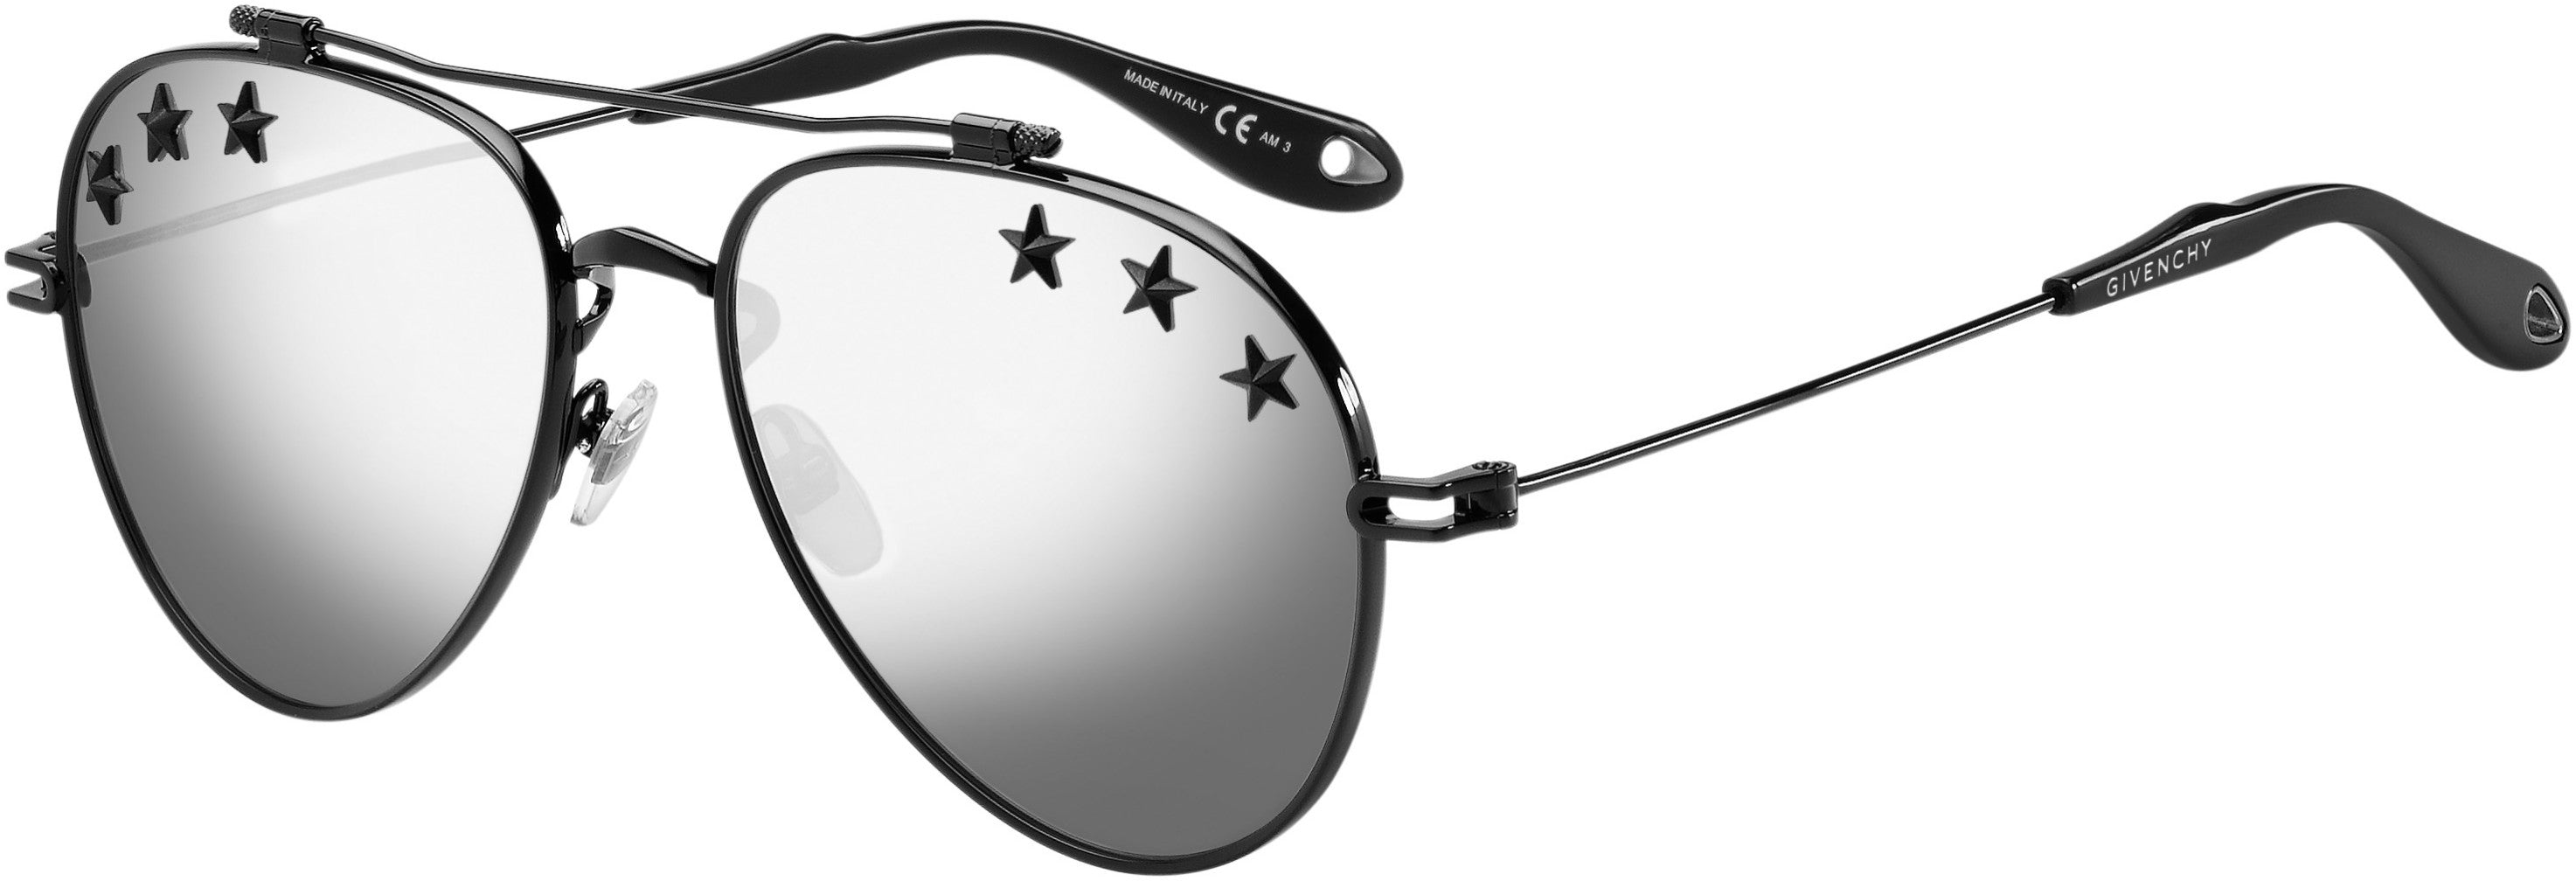  Givenchy 7057/stars Aviator Sunglasses 0807-0807  Black (DC Silver Multilay)